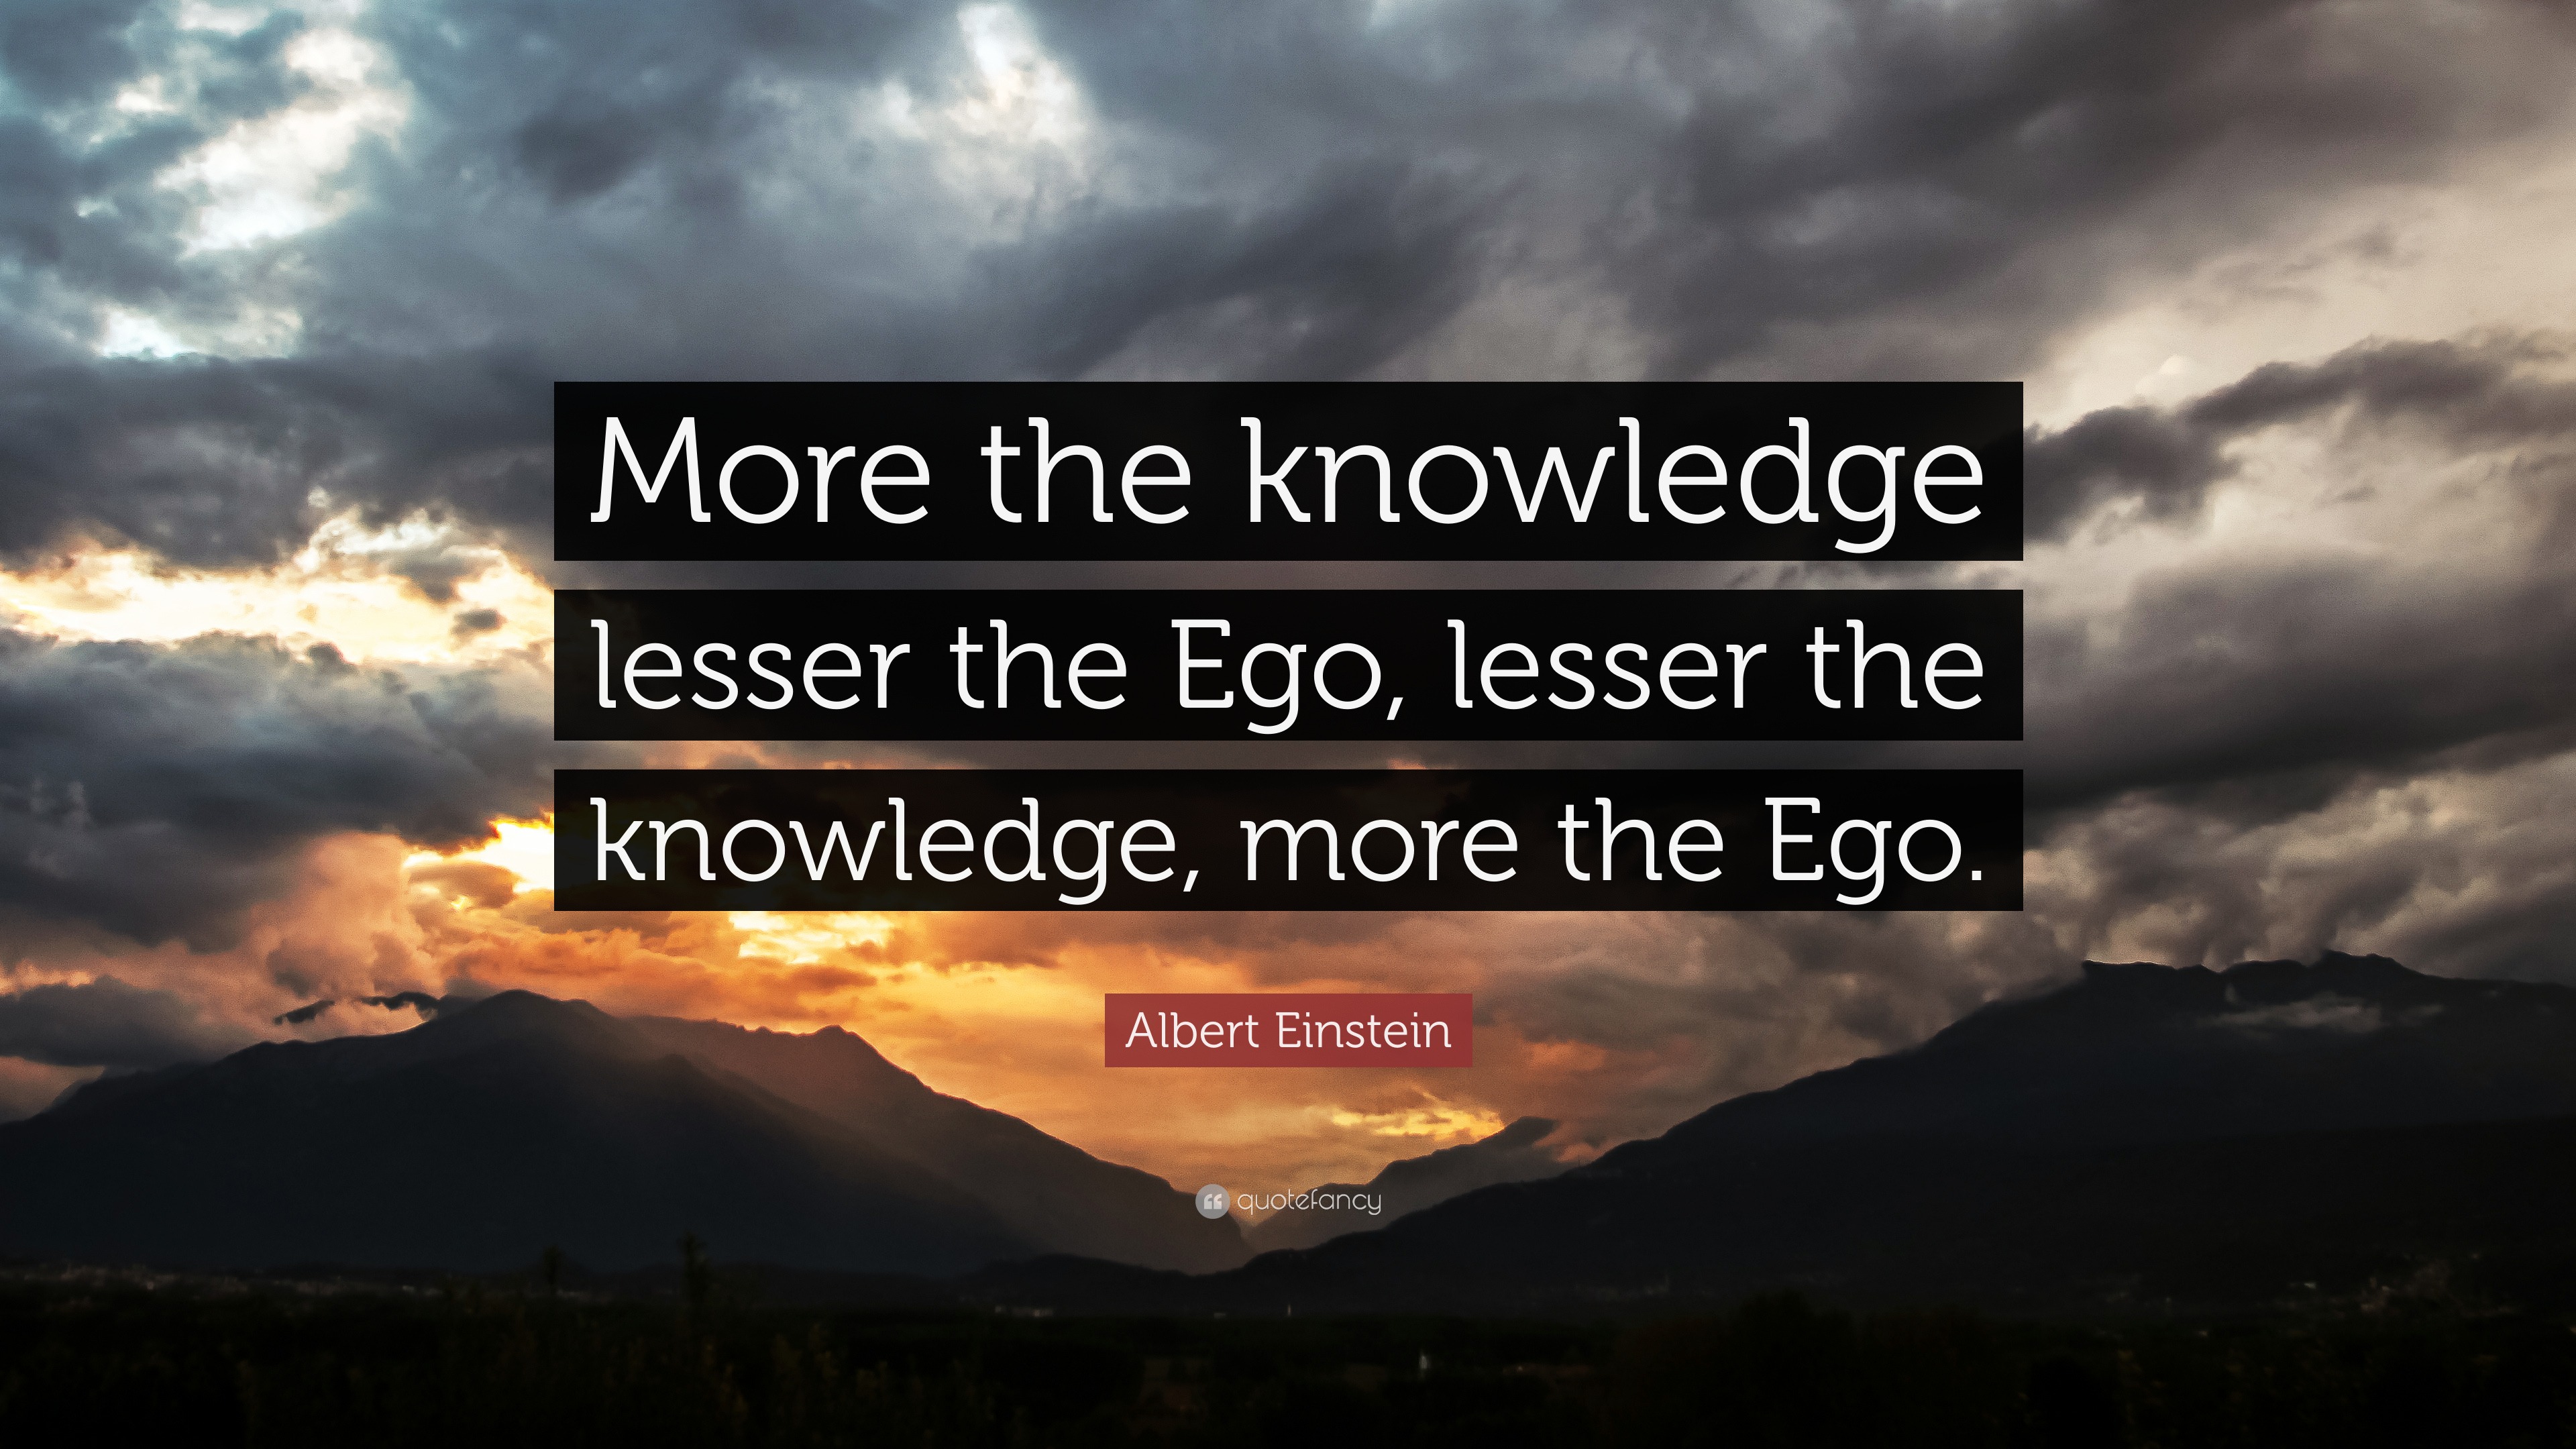 Albert Einstein Quote: “More the knowledge lesser the Ego, lesser the